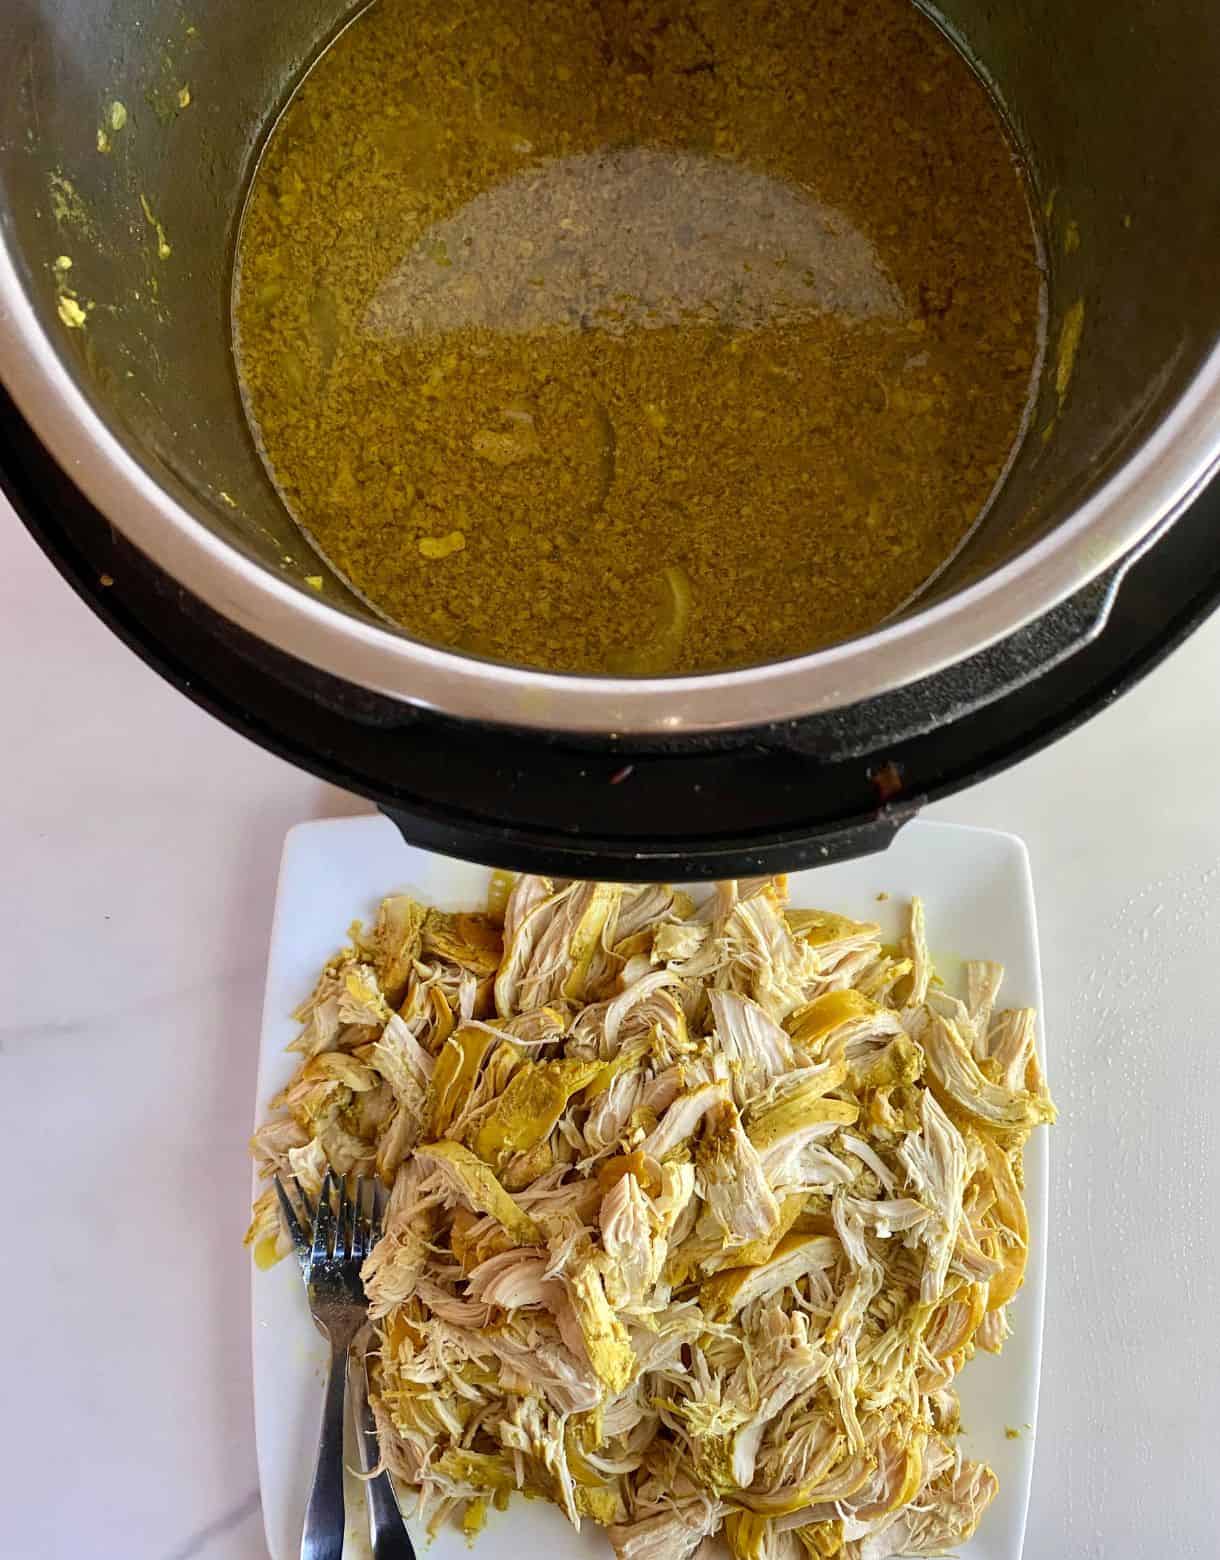 A plate of shredded curry chicken and a slow cooker with the cooking juices.